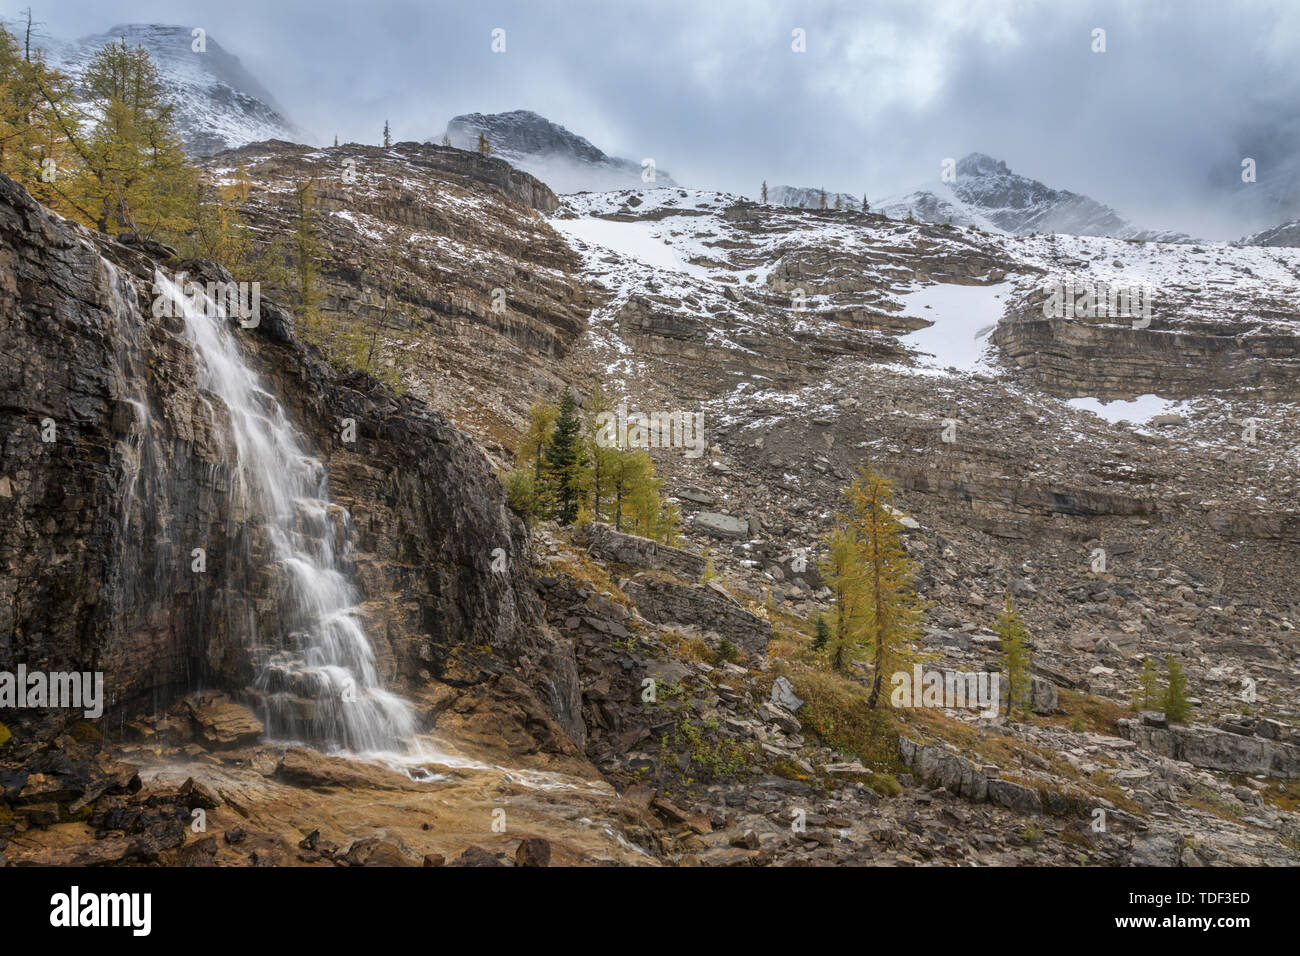 Waterfall in the Mountains, East Kootenays, Rocky Mountains, British Columbia, Canada Stock Photo